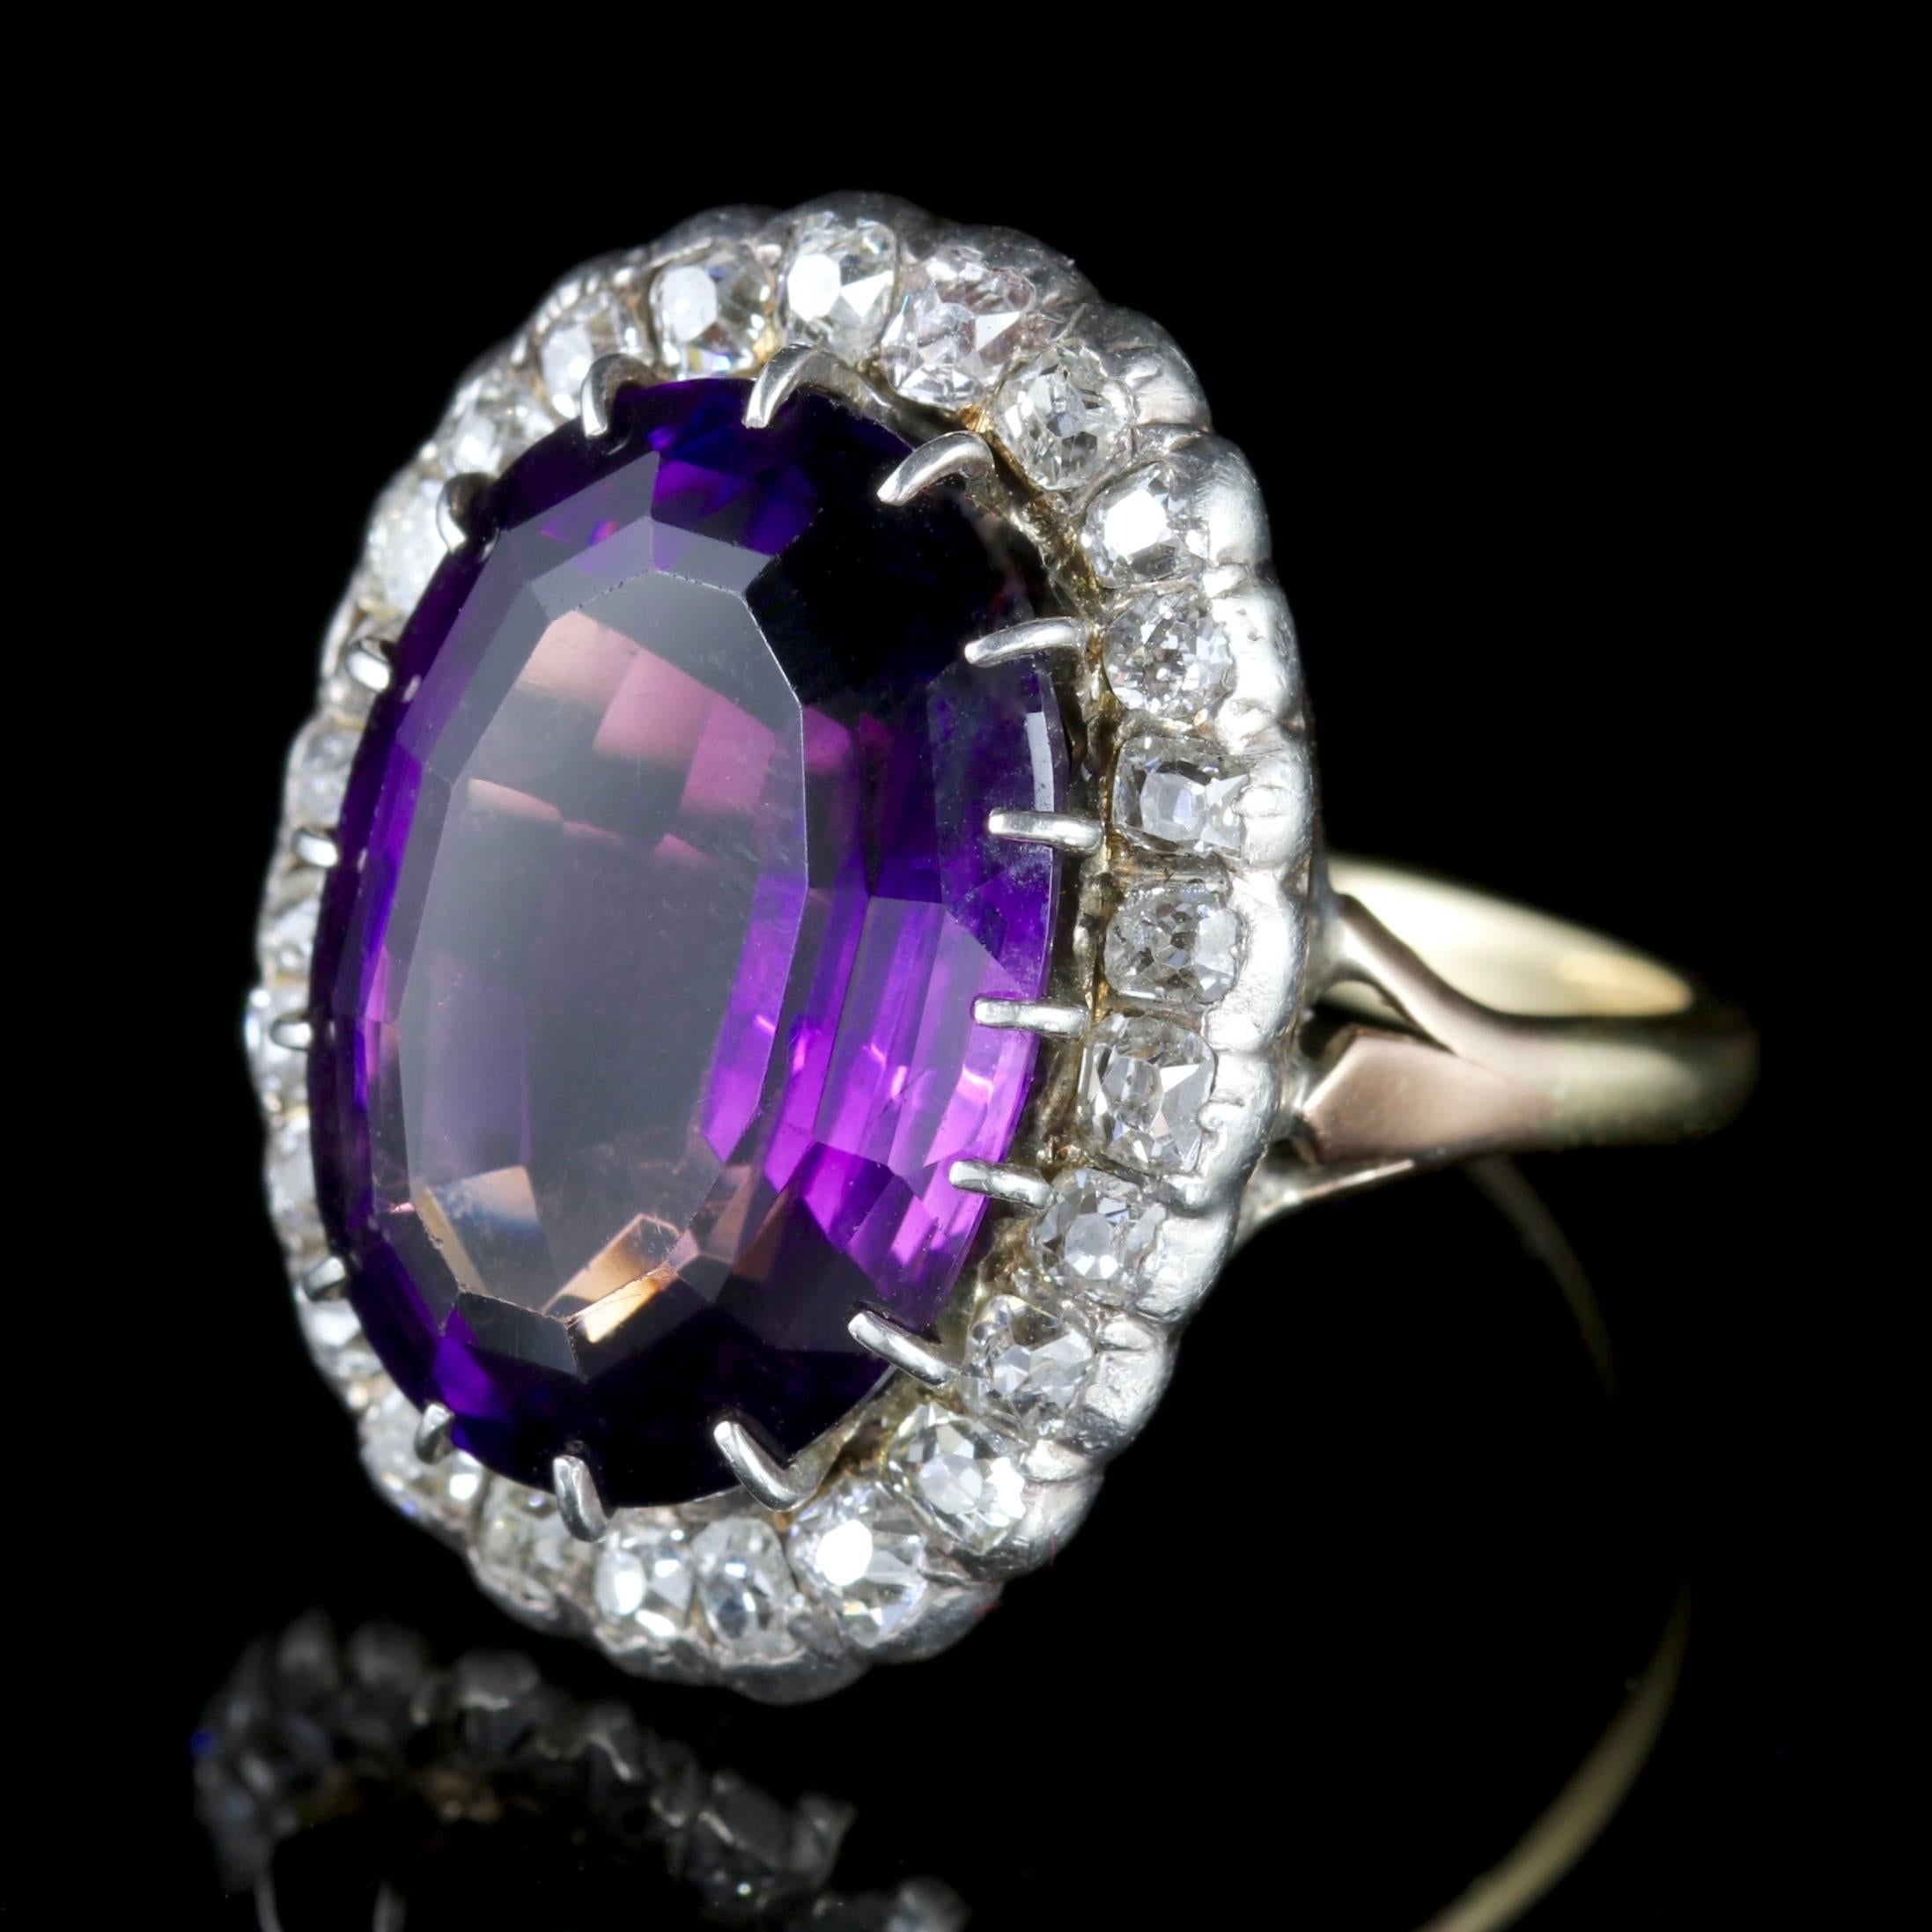 This stunning antique Amethyst and Diamond ring is Victorian Circa 1900. 

The large natural Amethyst is 16ct in size surrounded by 1.25ct of beautiful Old Cut Diamonds.

Amethyst has been highly esteemed throughout the ages for its stunning beauty